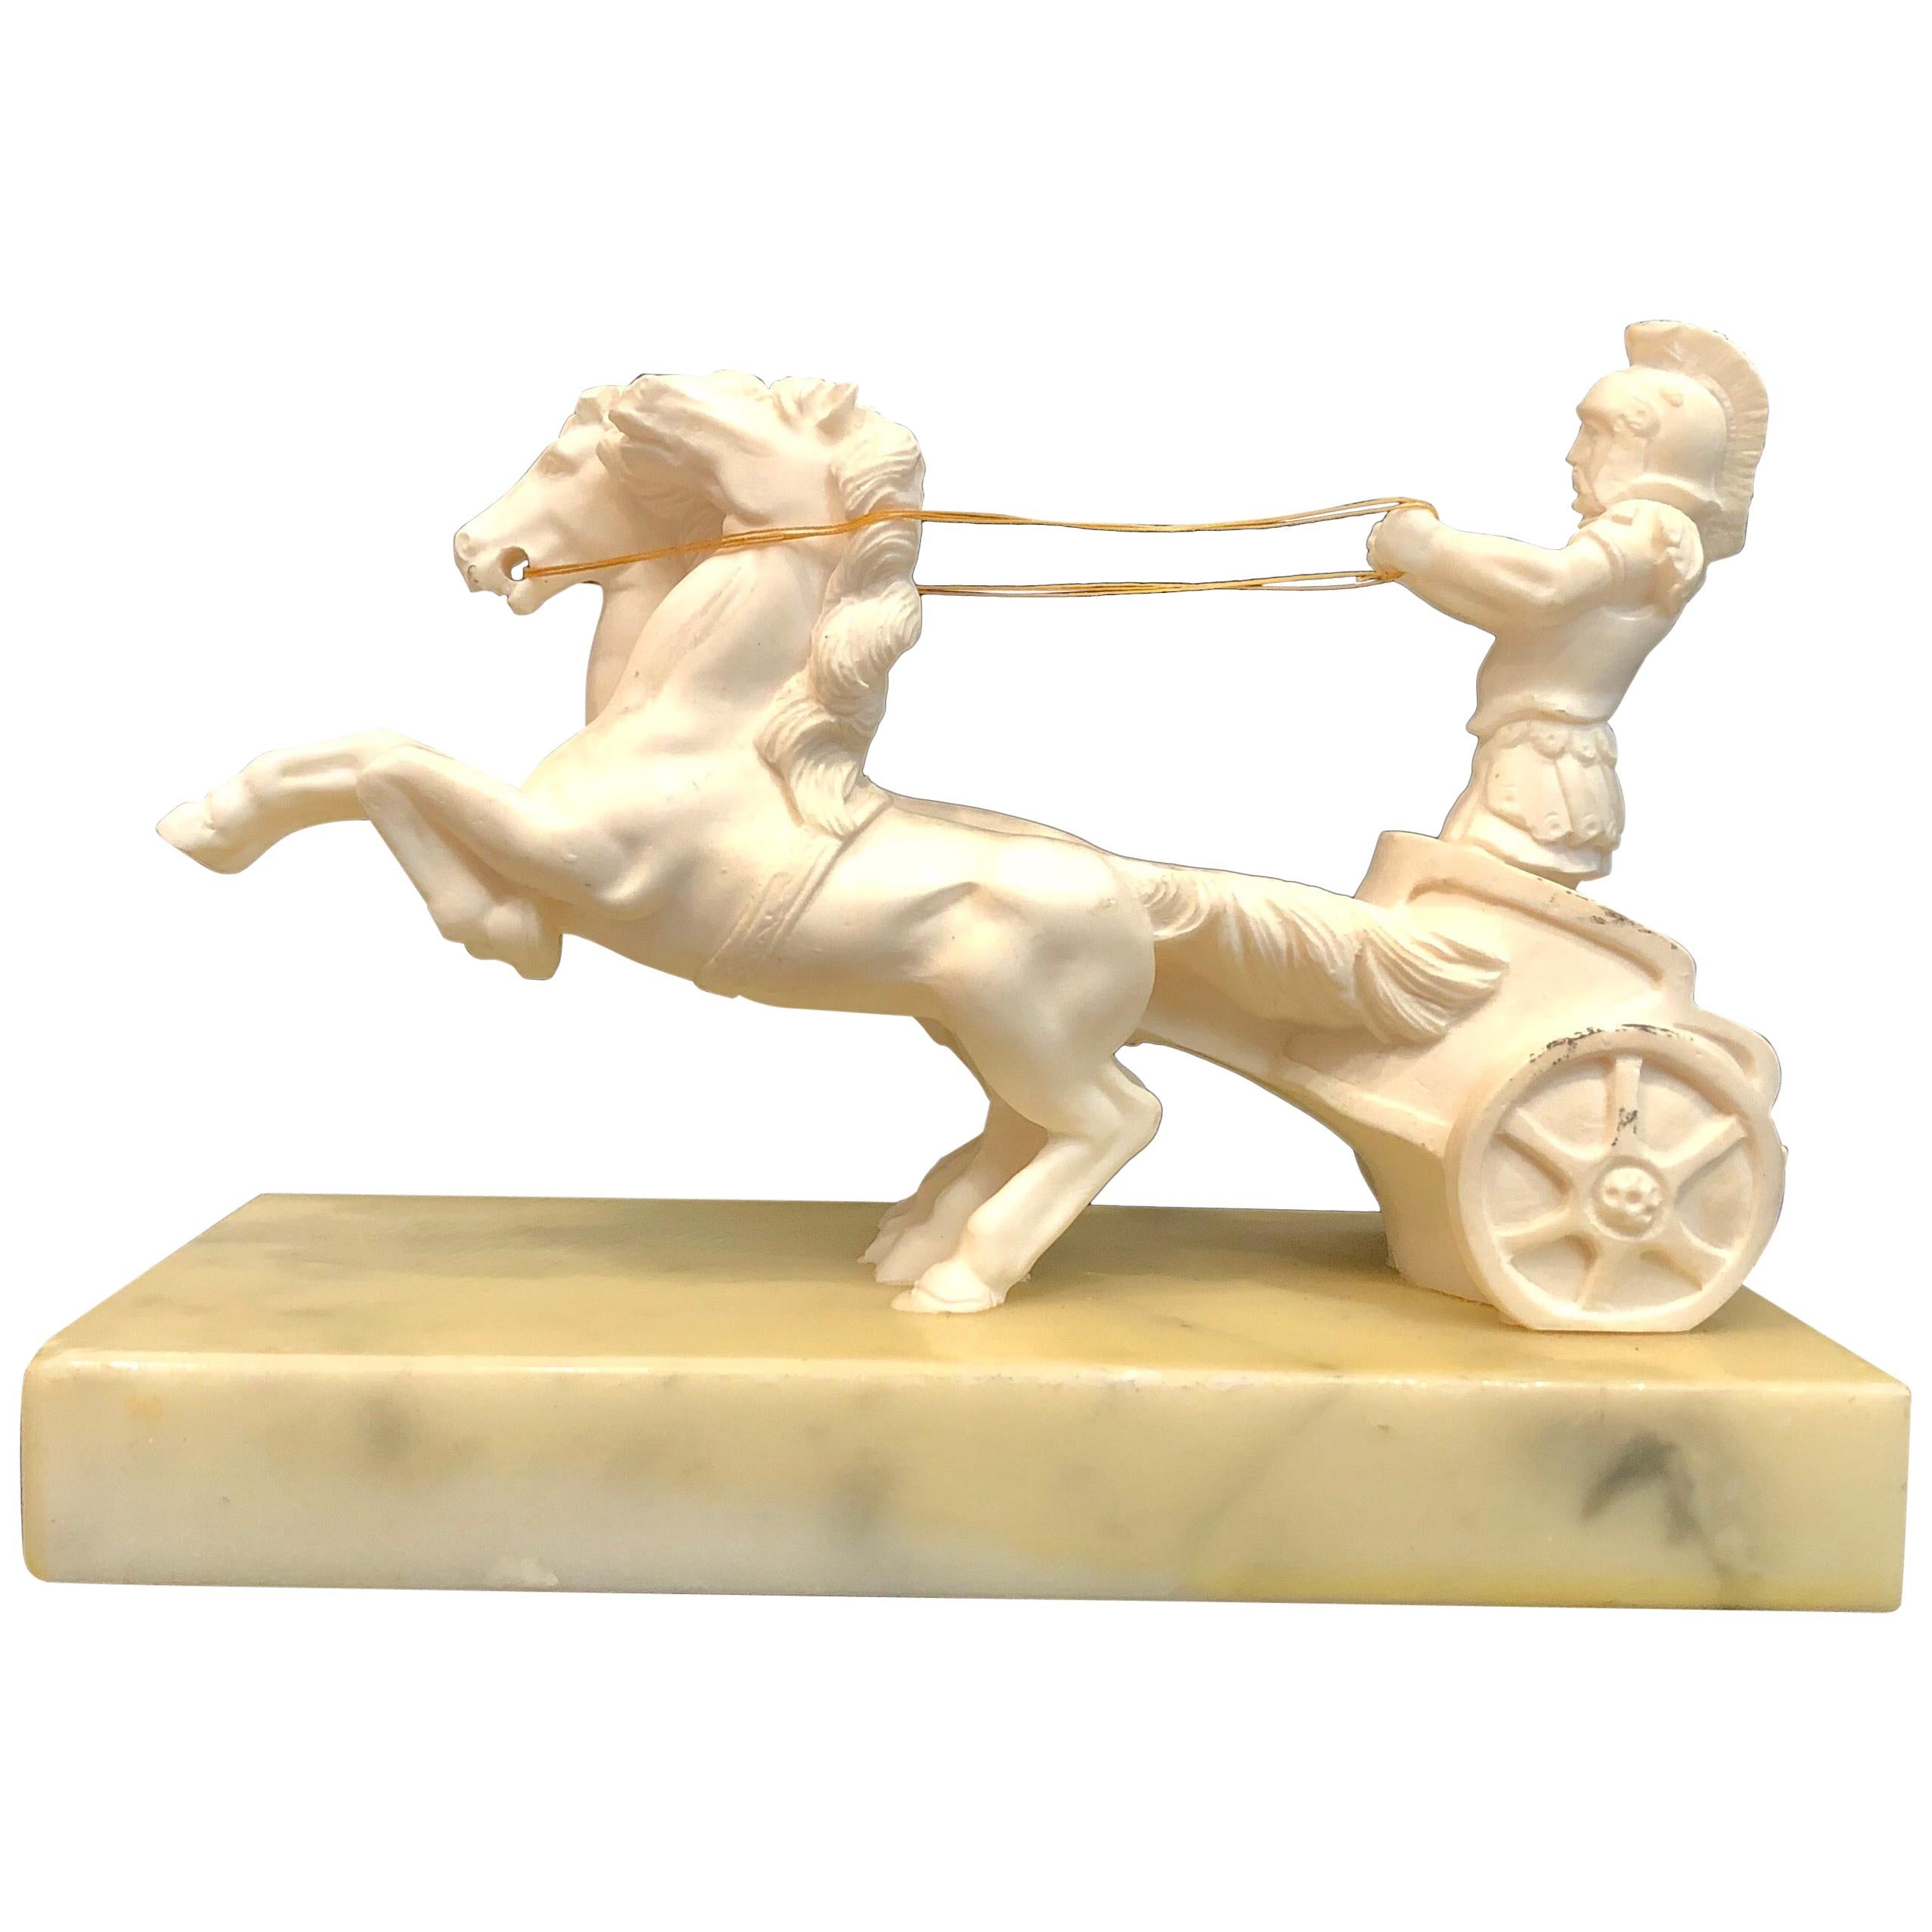 Vintage Roman Soldier and Chariot Horses Sculpture on Marble Base